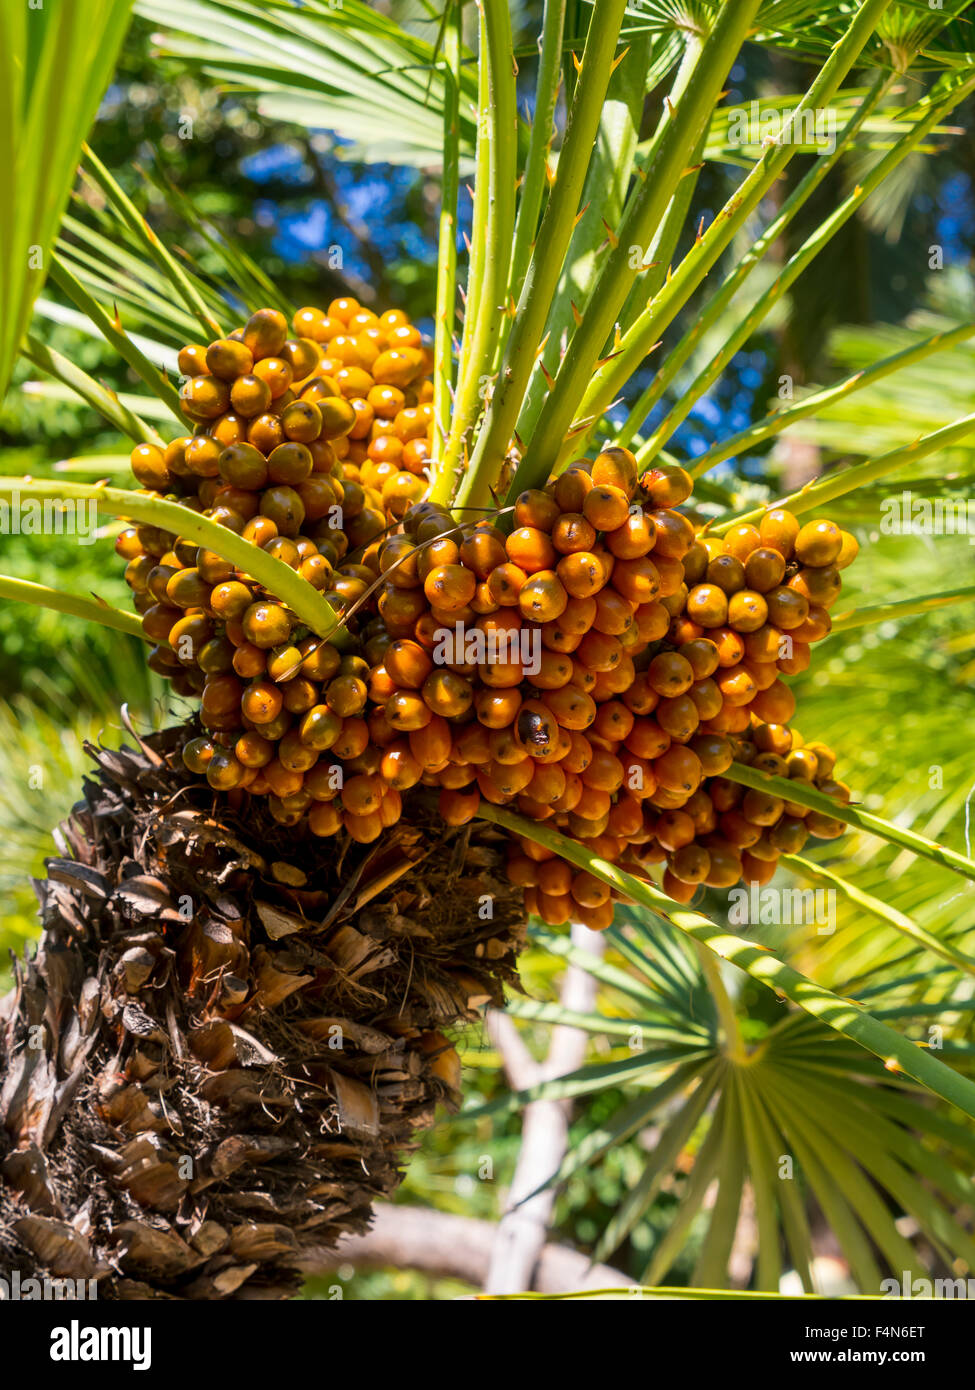 Canary Island Date Palm, Phoenix canariensis, with fruits Stock Photo